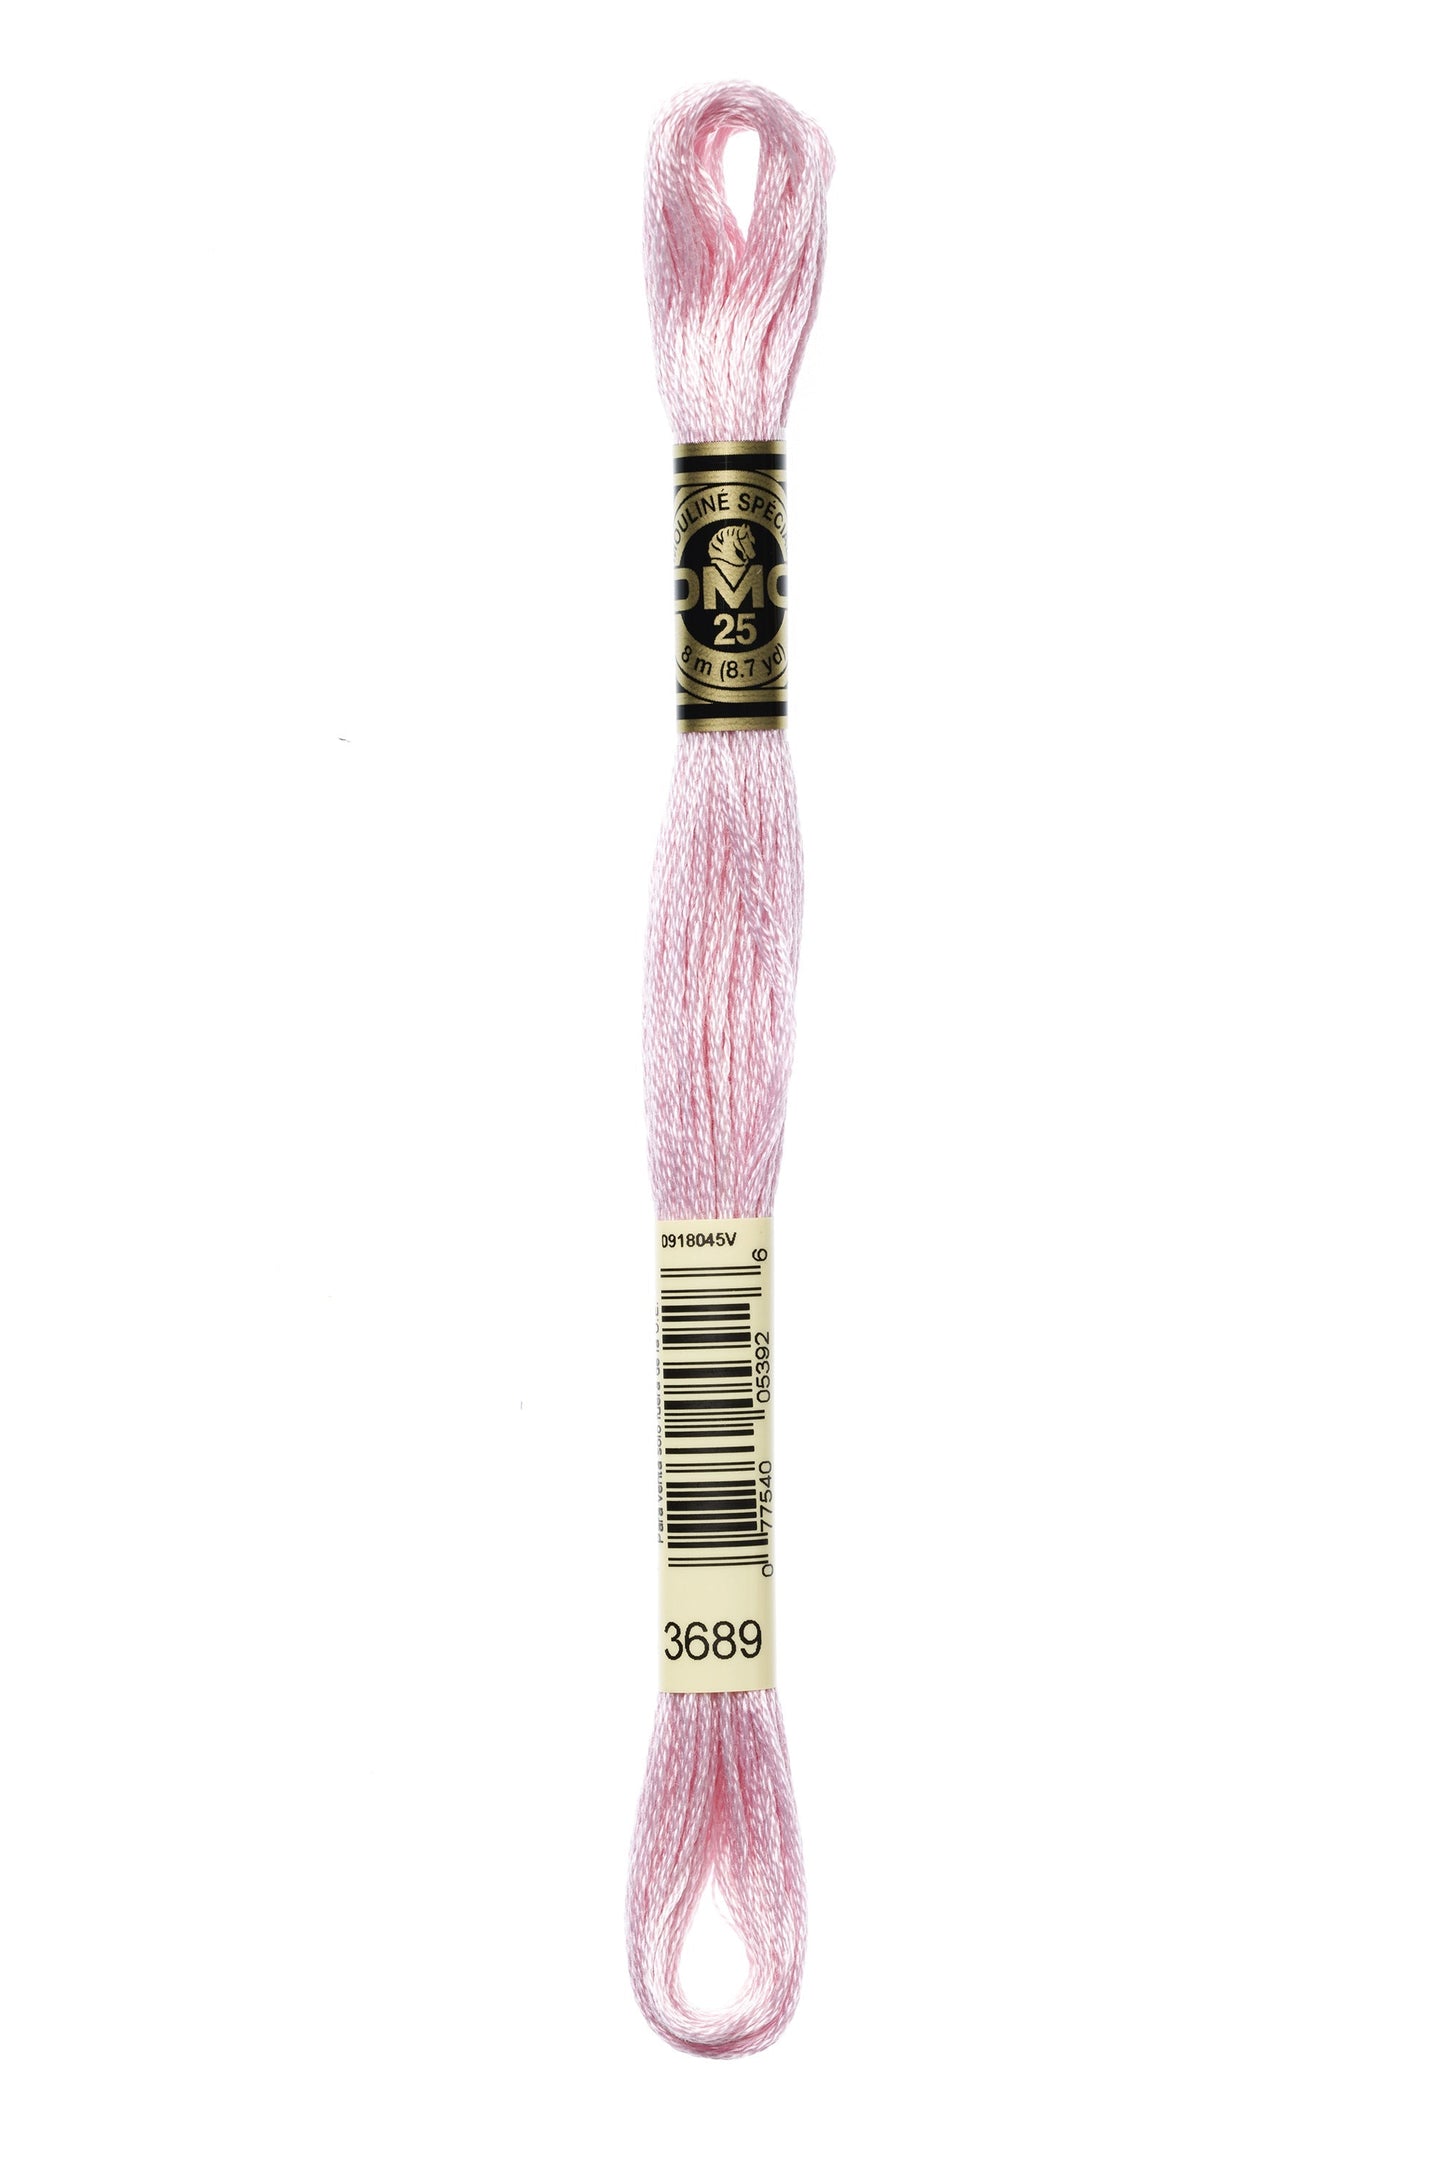 Six-Strand Embroidery Floss - 3689 (Pale Orchid)-Embroidery Thread-Wild and Woolly Yarns